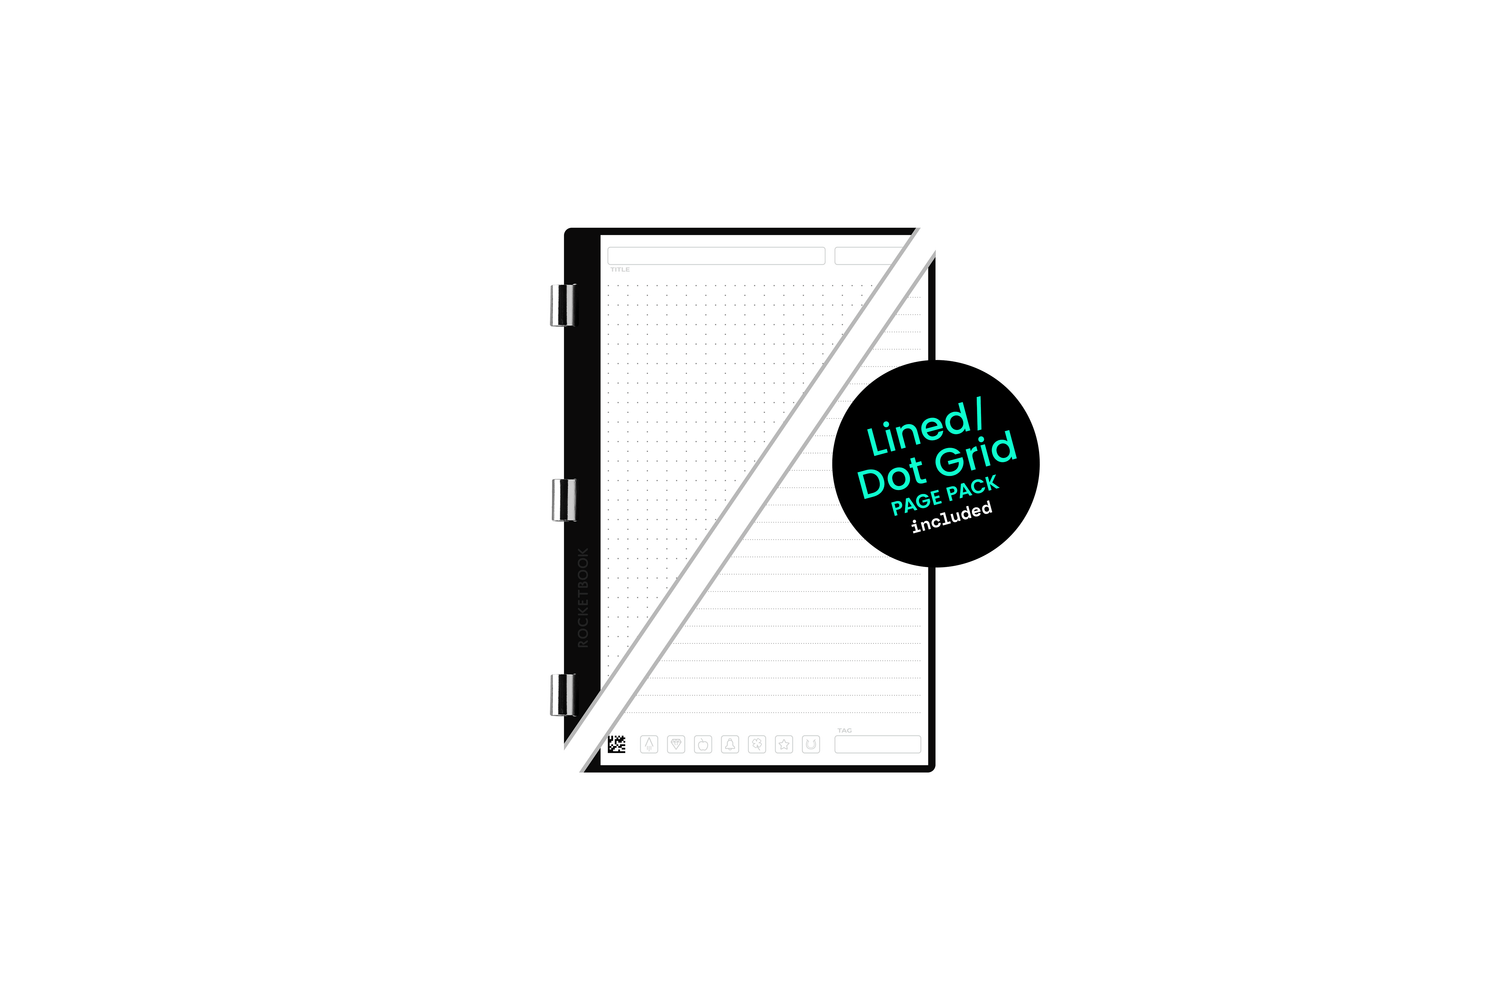 Executive size Rocketbook Pro Page Pack with dot grid / lined template